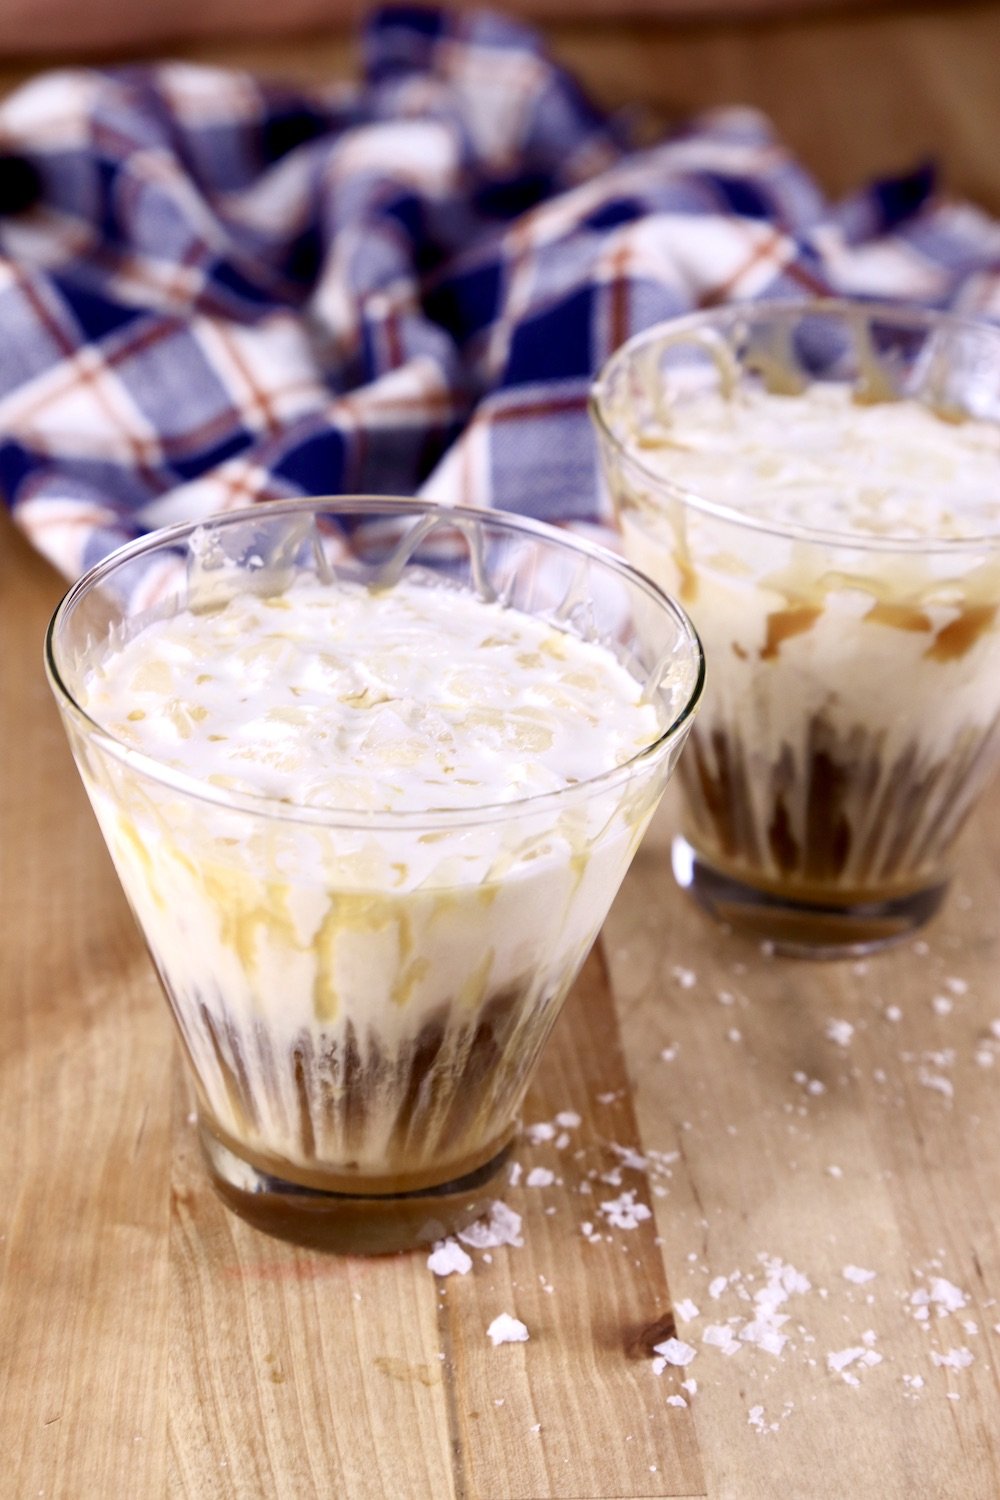 2 glasses with caramel drizzle and layered white Russian drinks